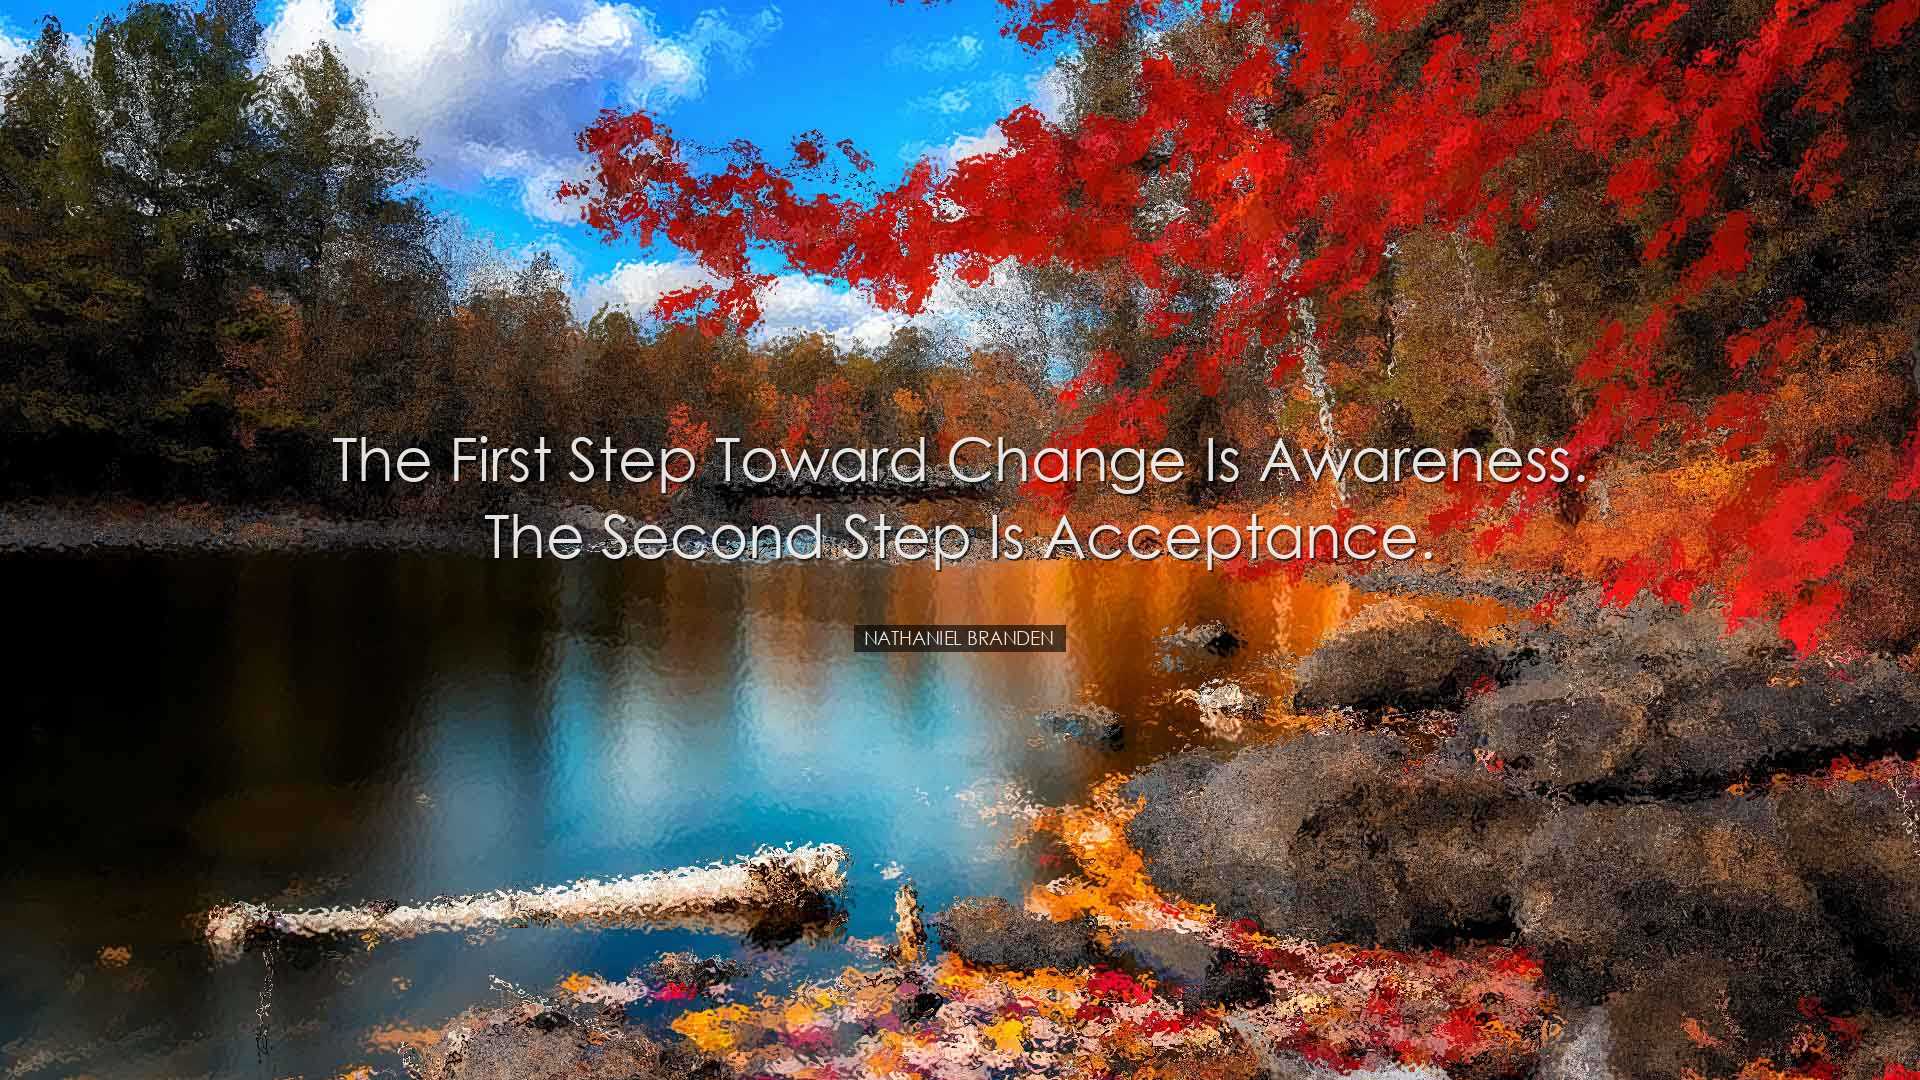 The first step toward change is awareness. The second step is acce